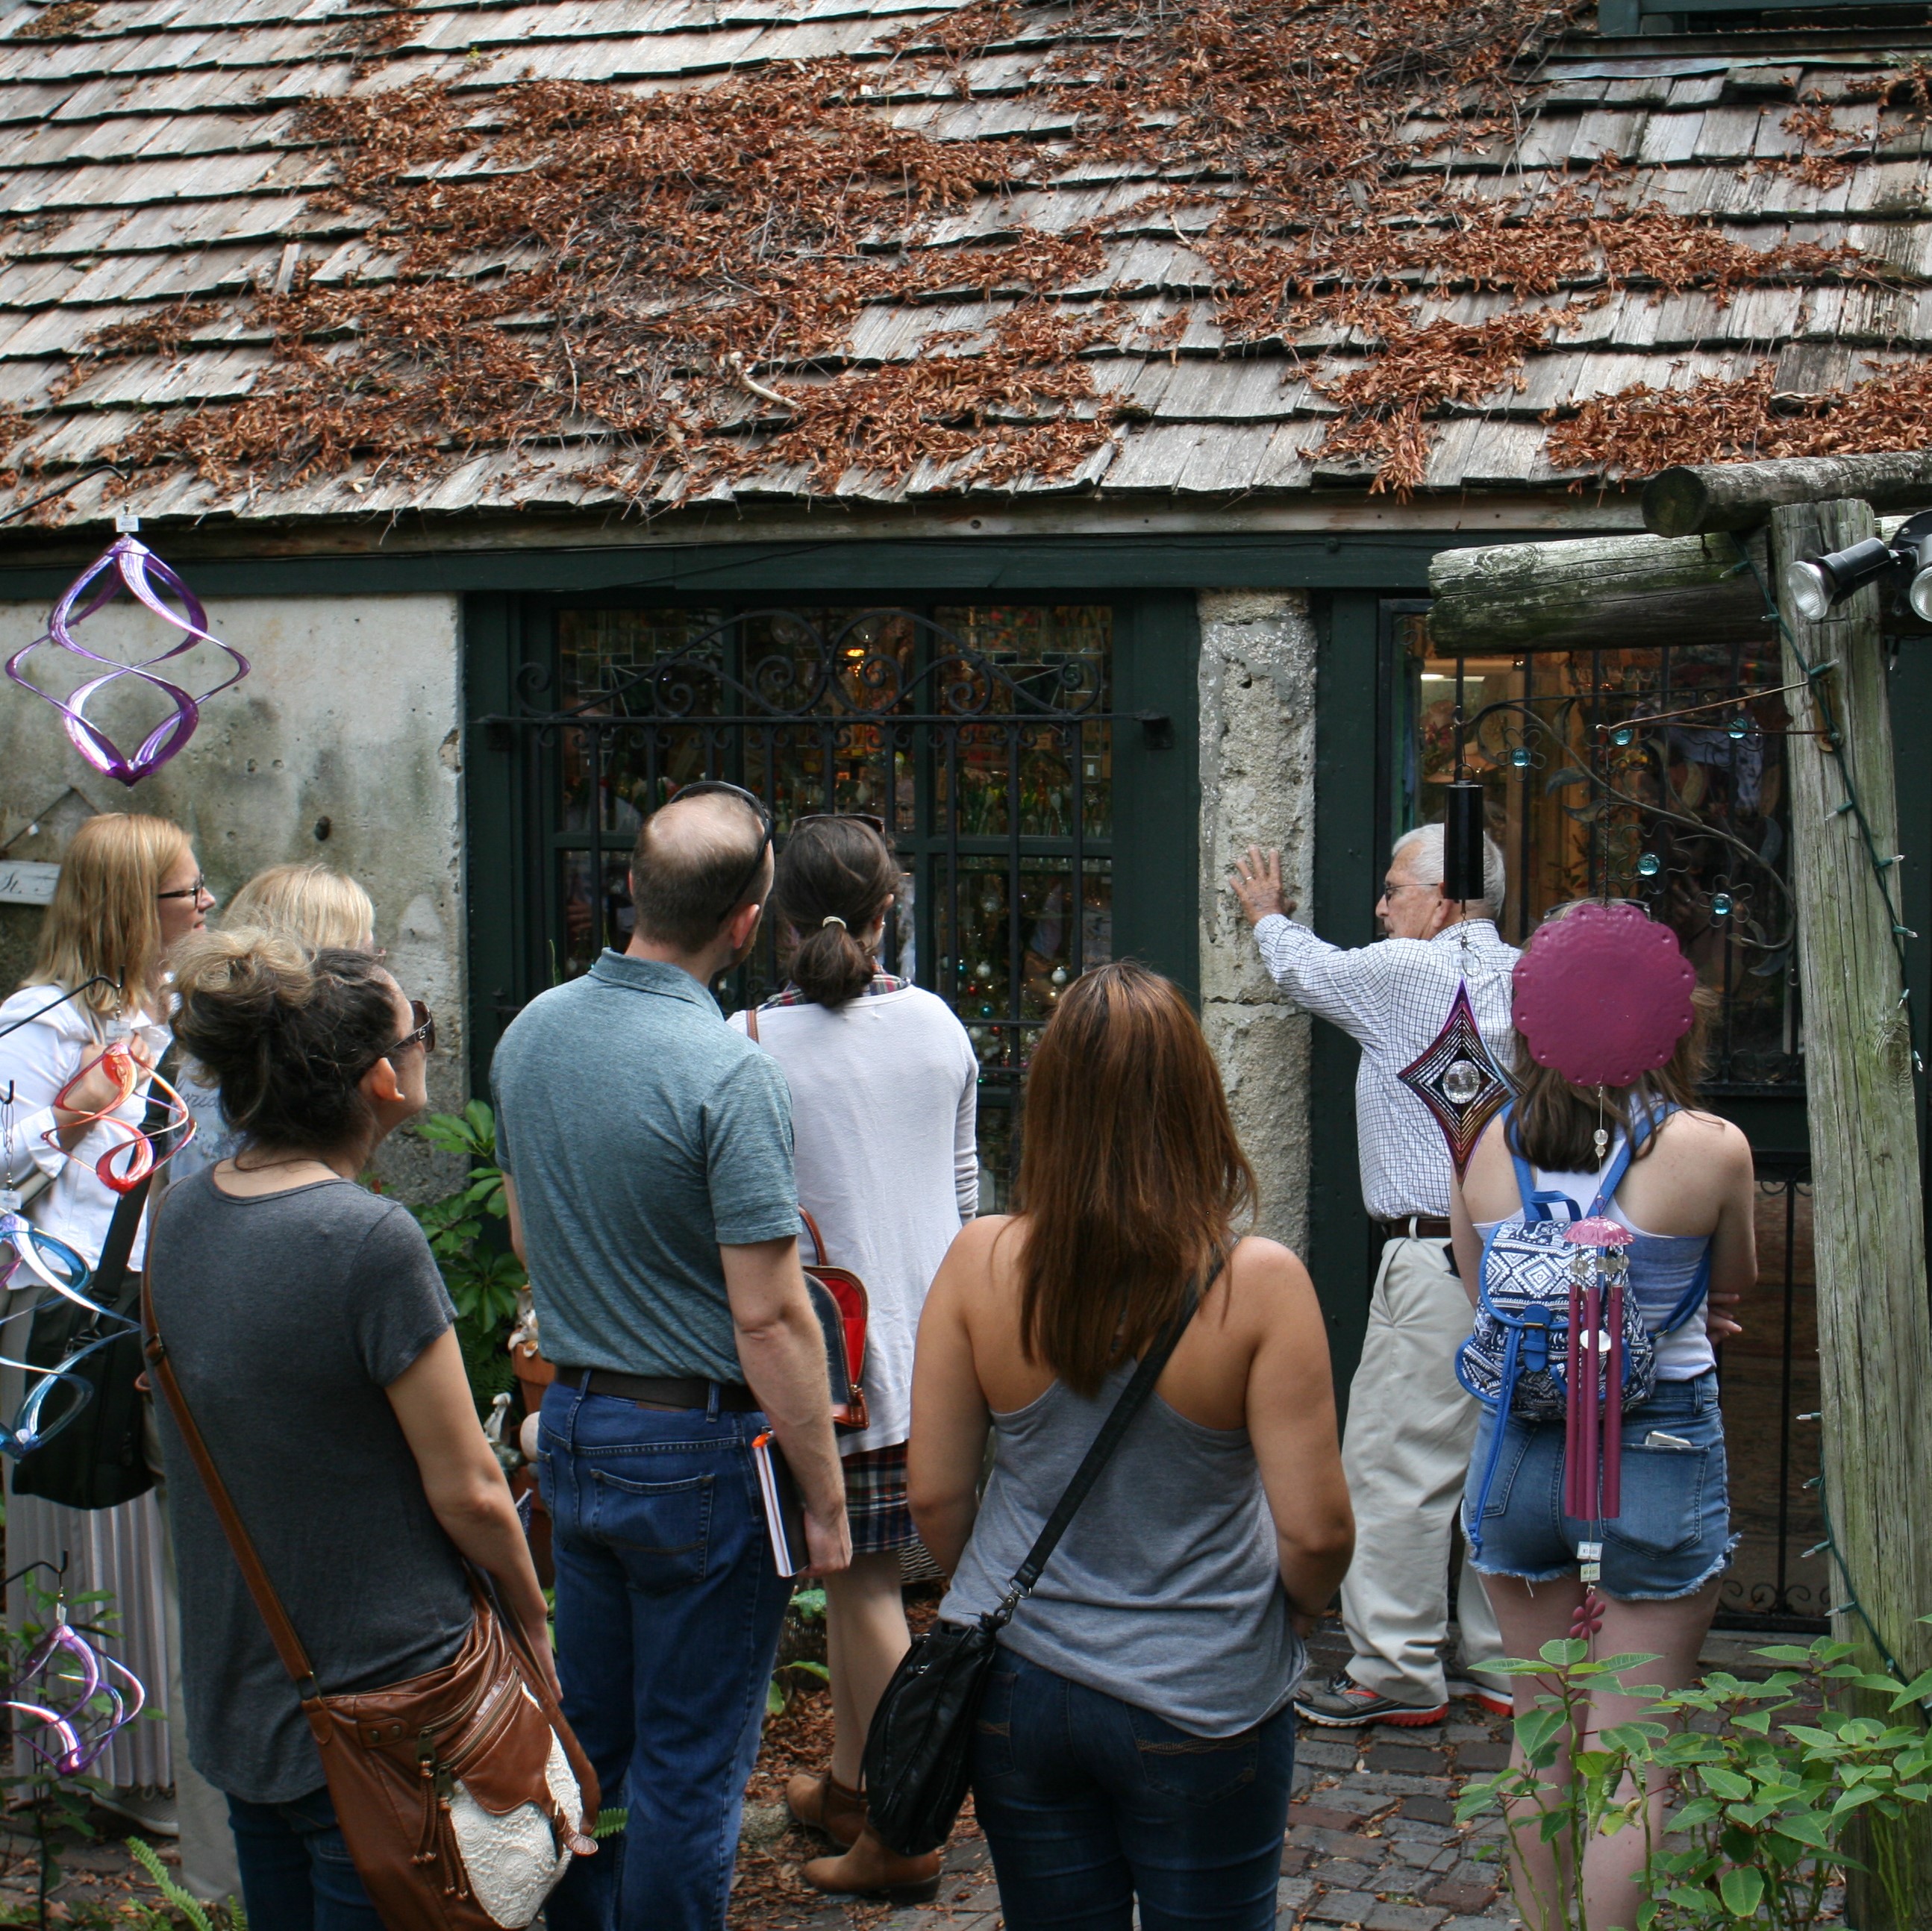 Group of people being shown the exterior of a historic building